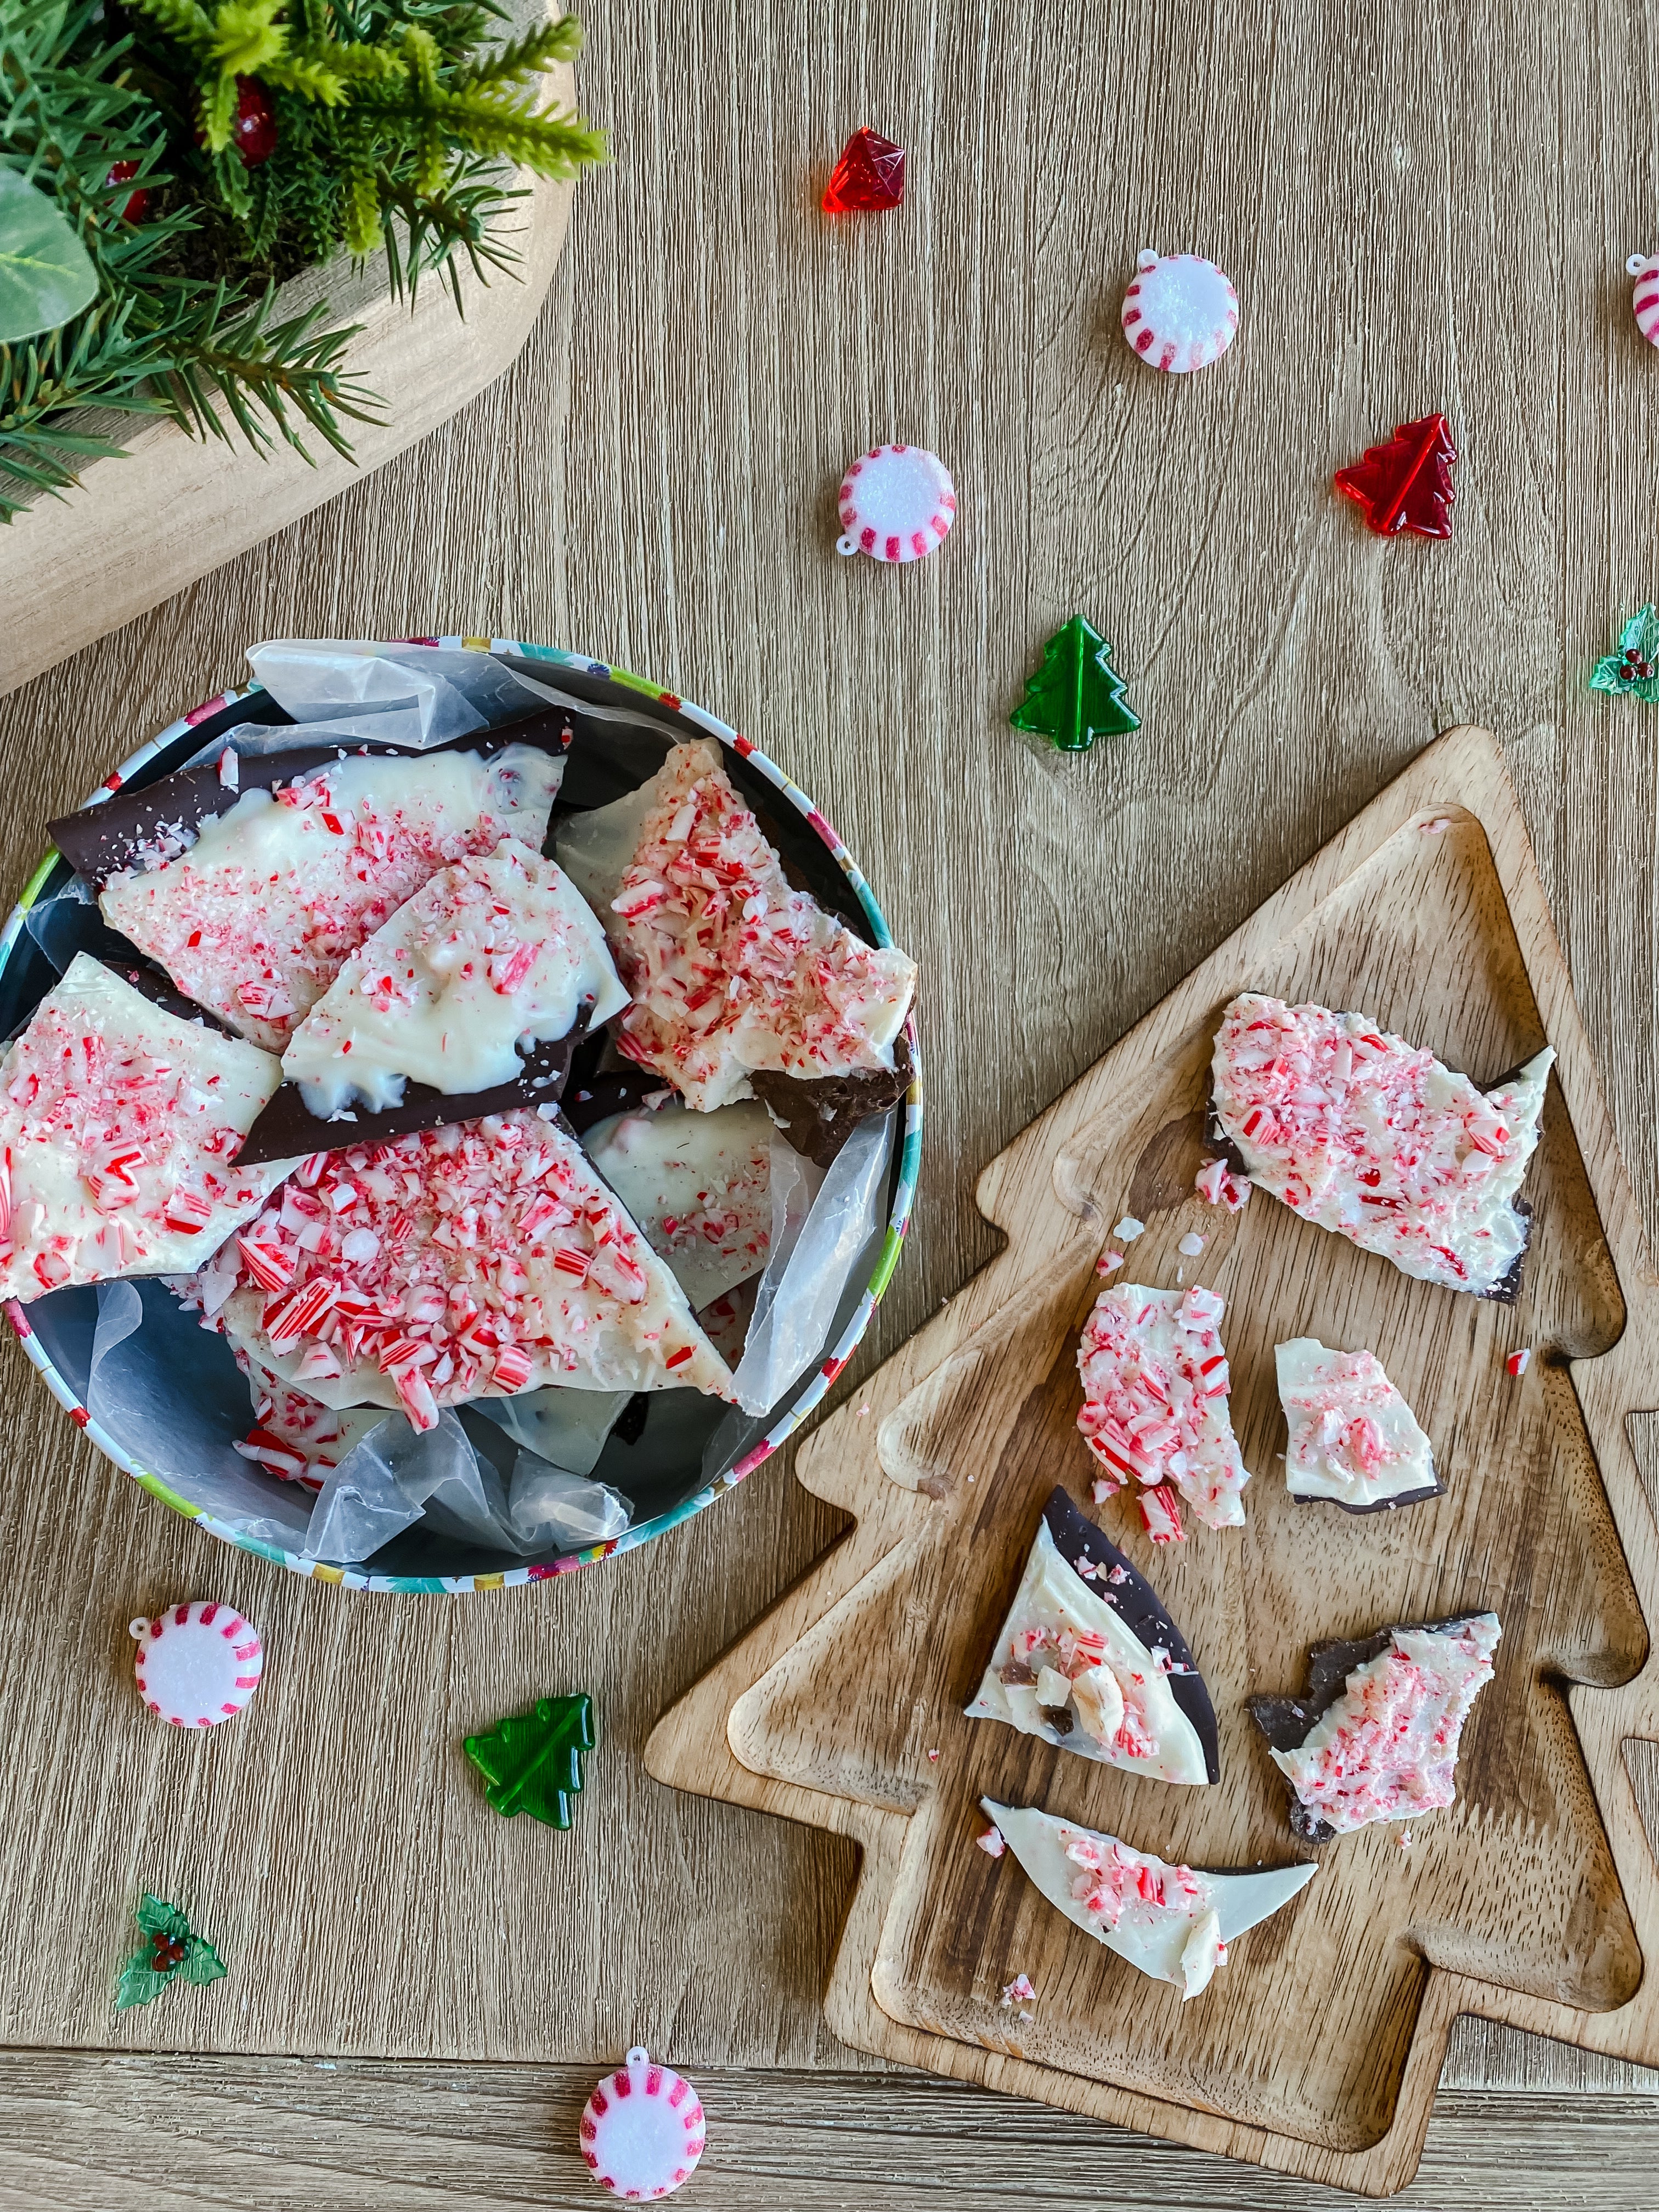 Candy cane bark in bowl & wooden tree tray